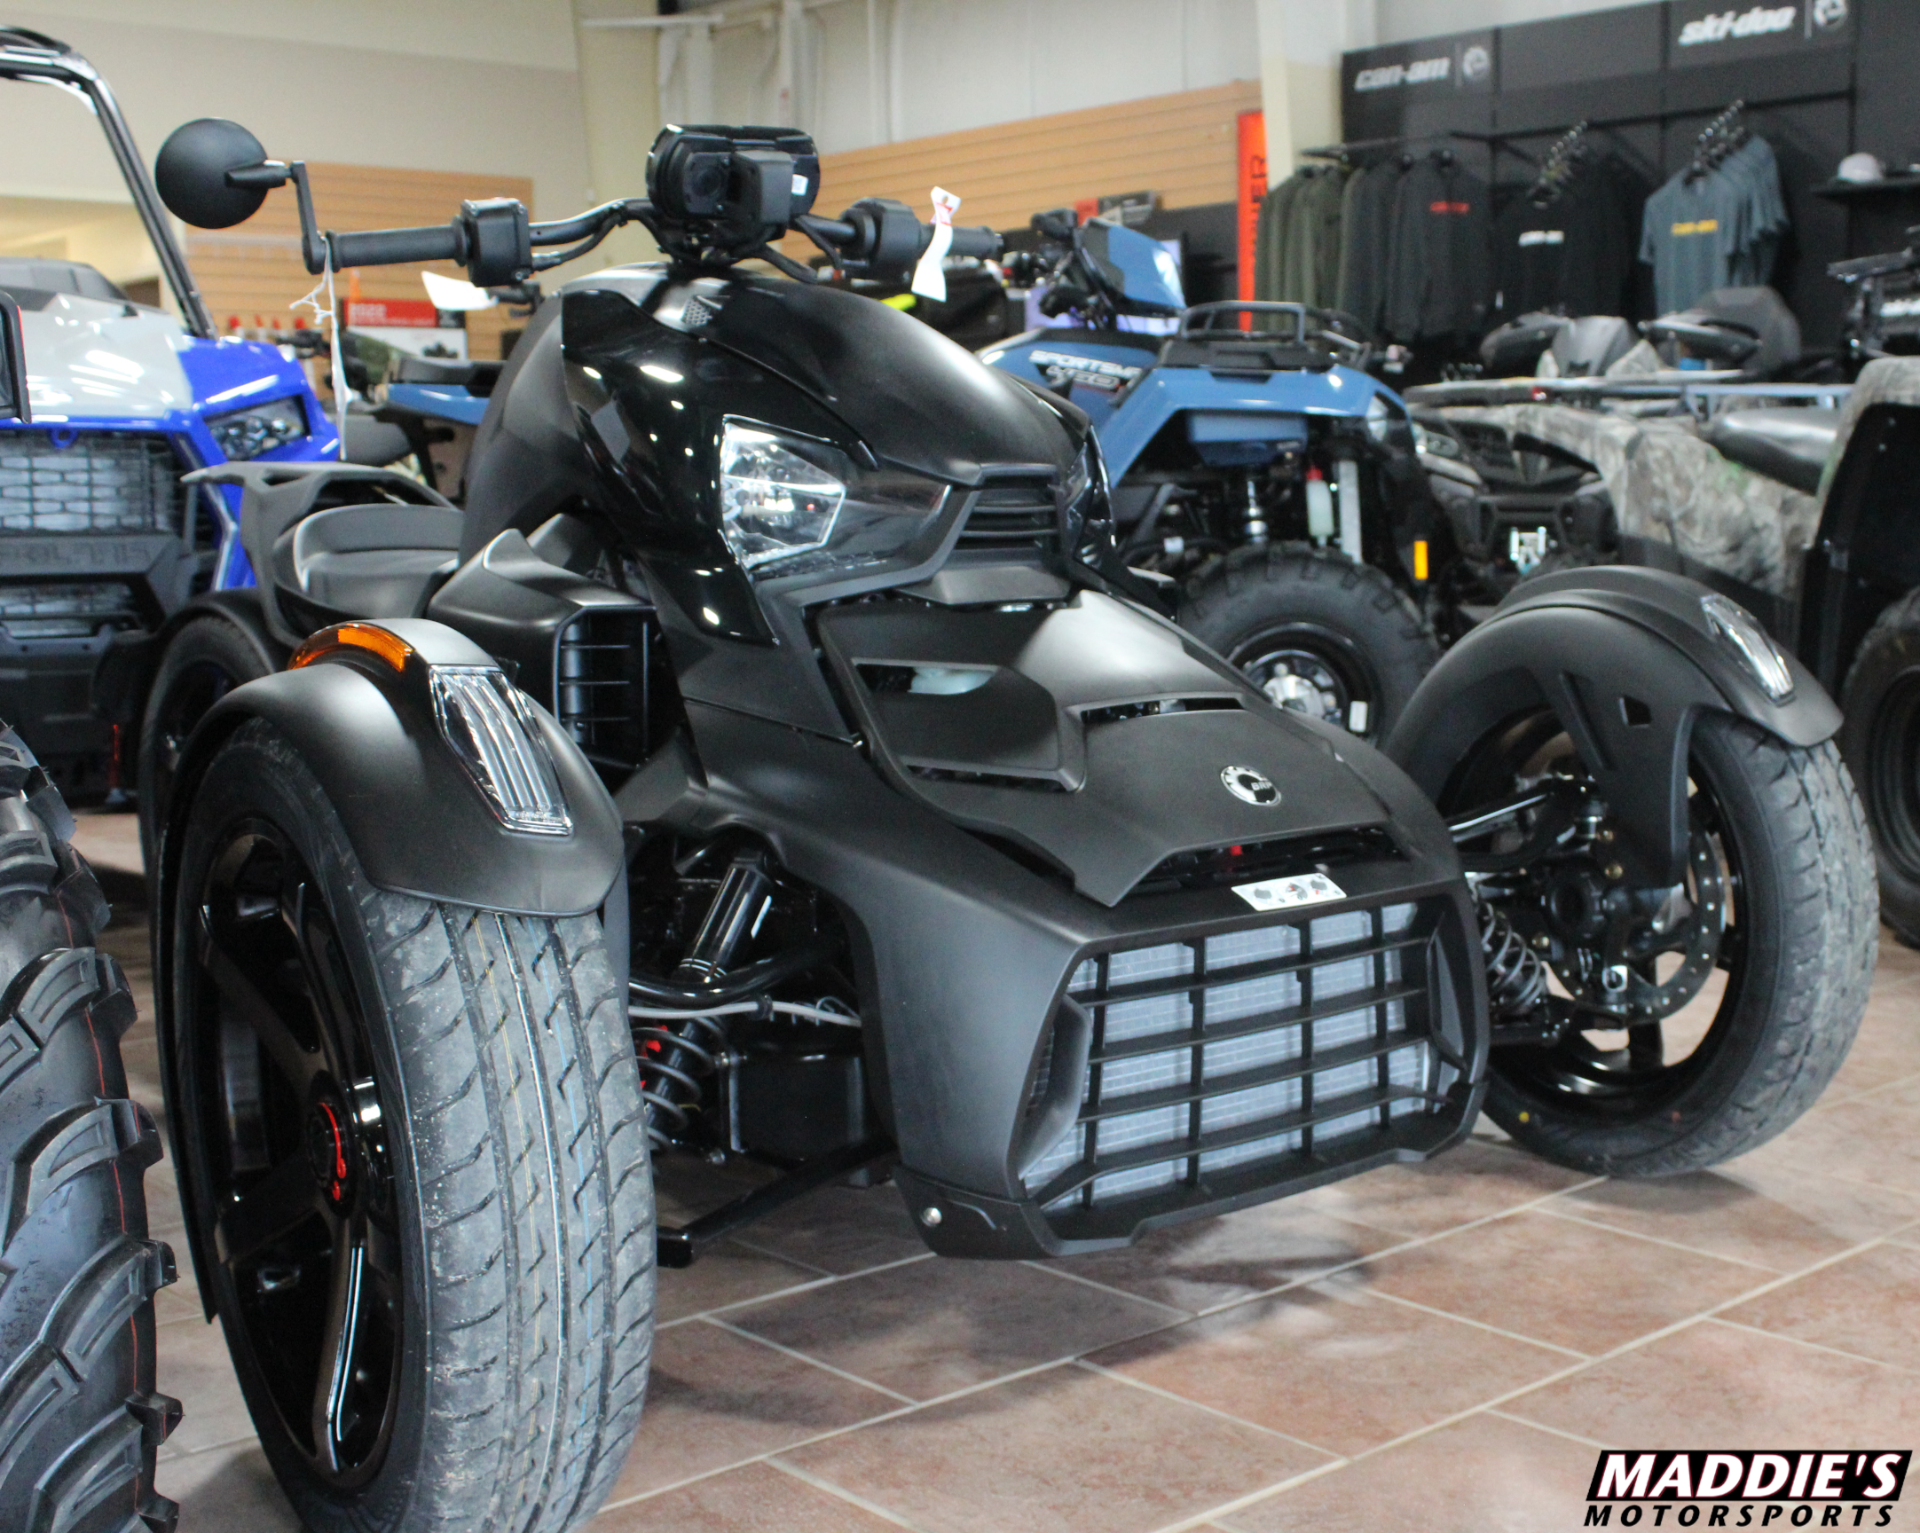 2022 Can-Am Ryker 600 ACE in Spencerport, New York - Photo 1